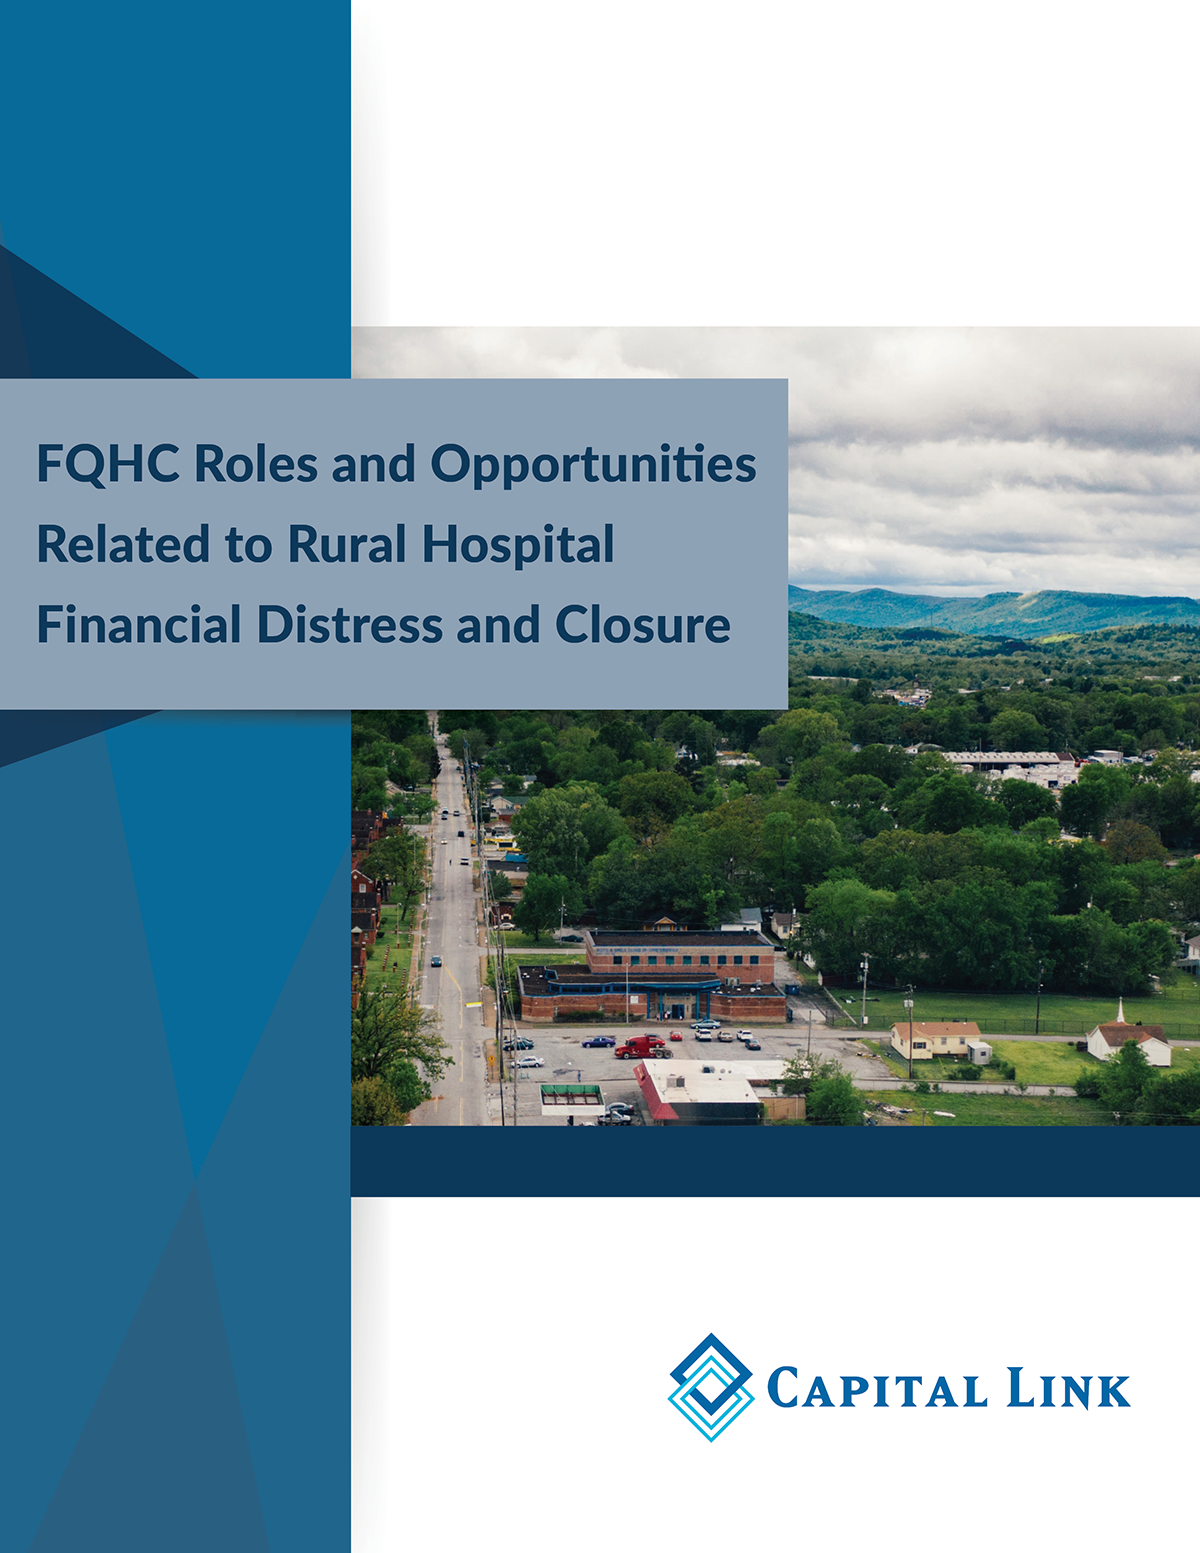 FQHC Roles and Opportunities Related to Rural Hospital Distress and Closure